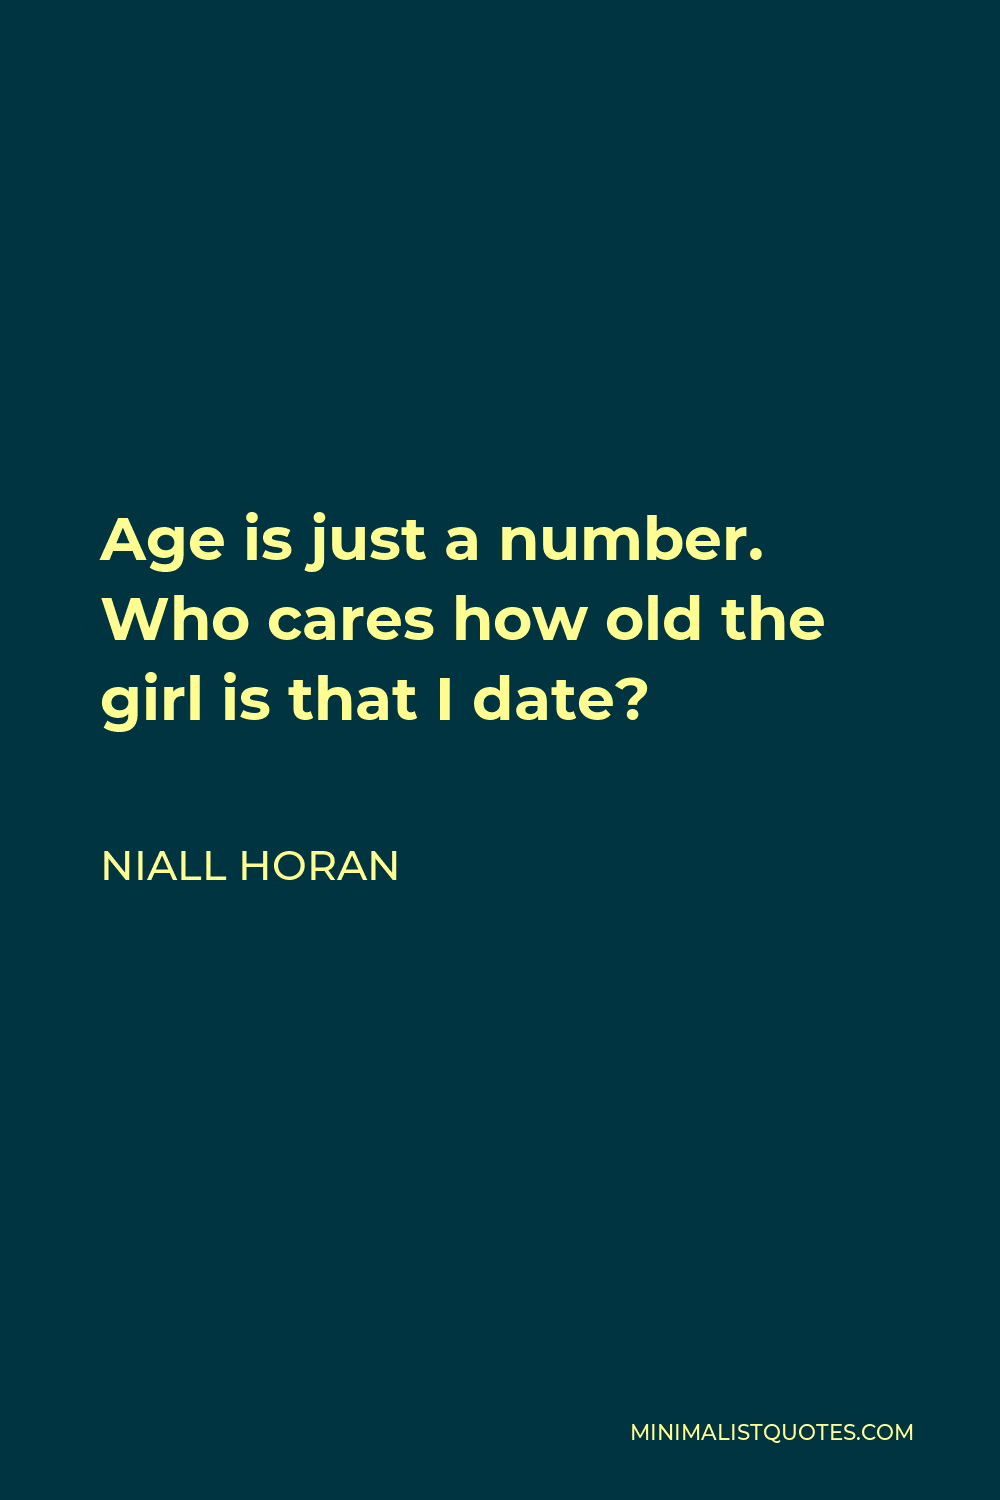 Niall Horan Quote - Age is just a number. Who cares how old the girl is that I date?